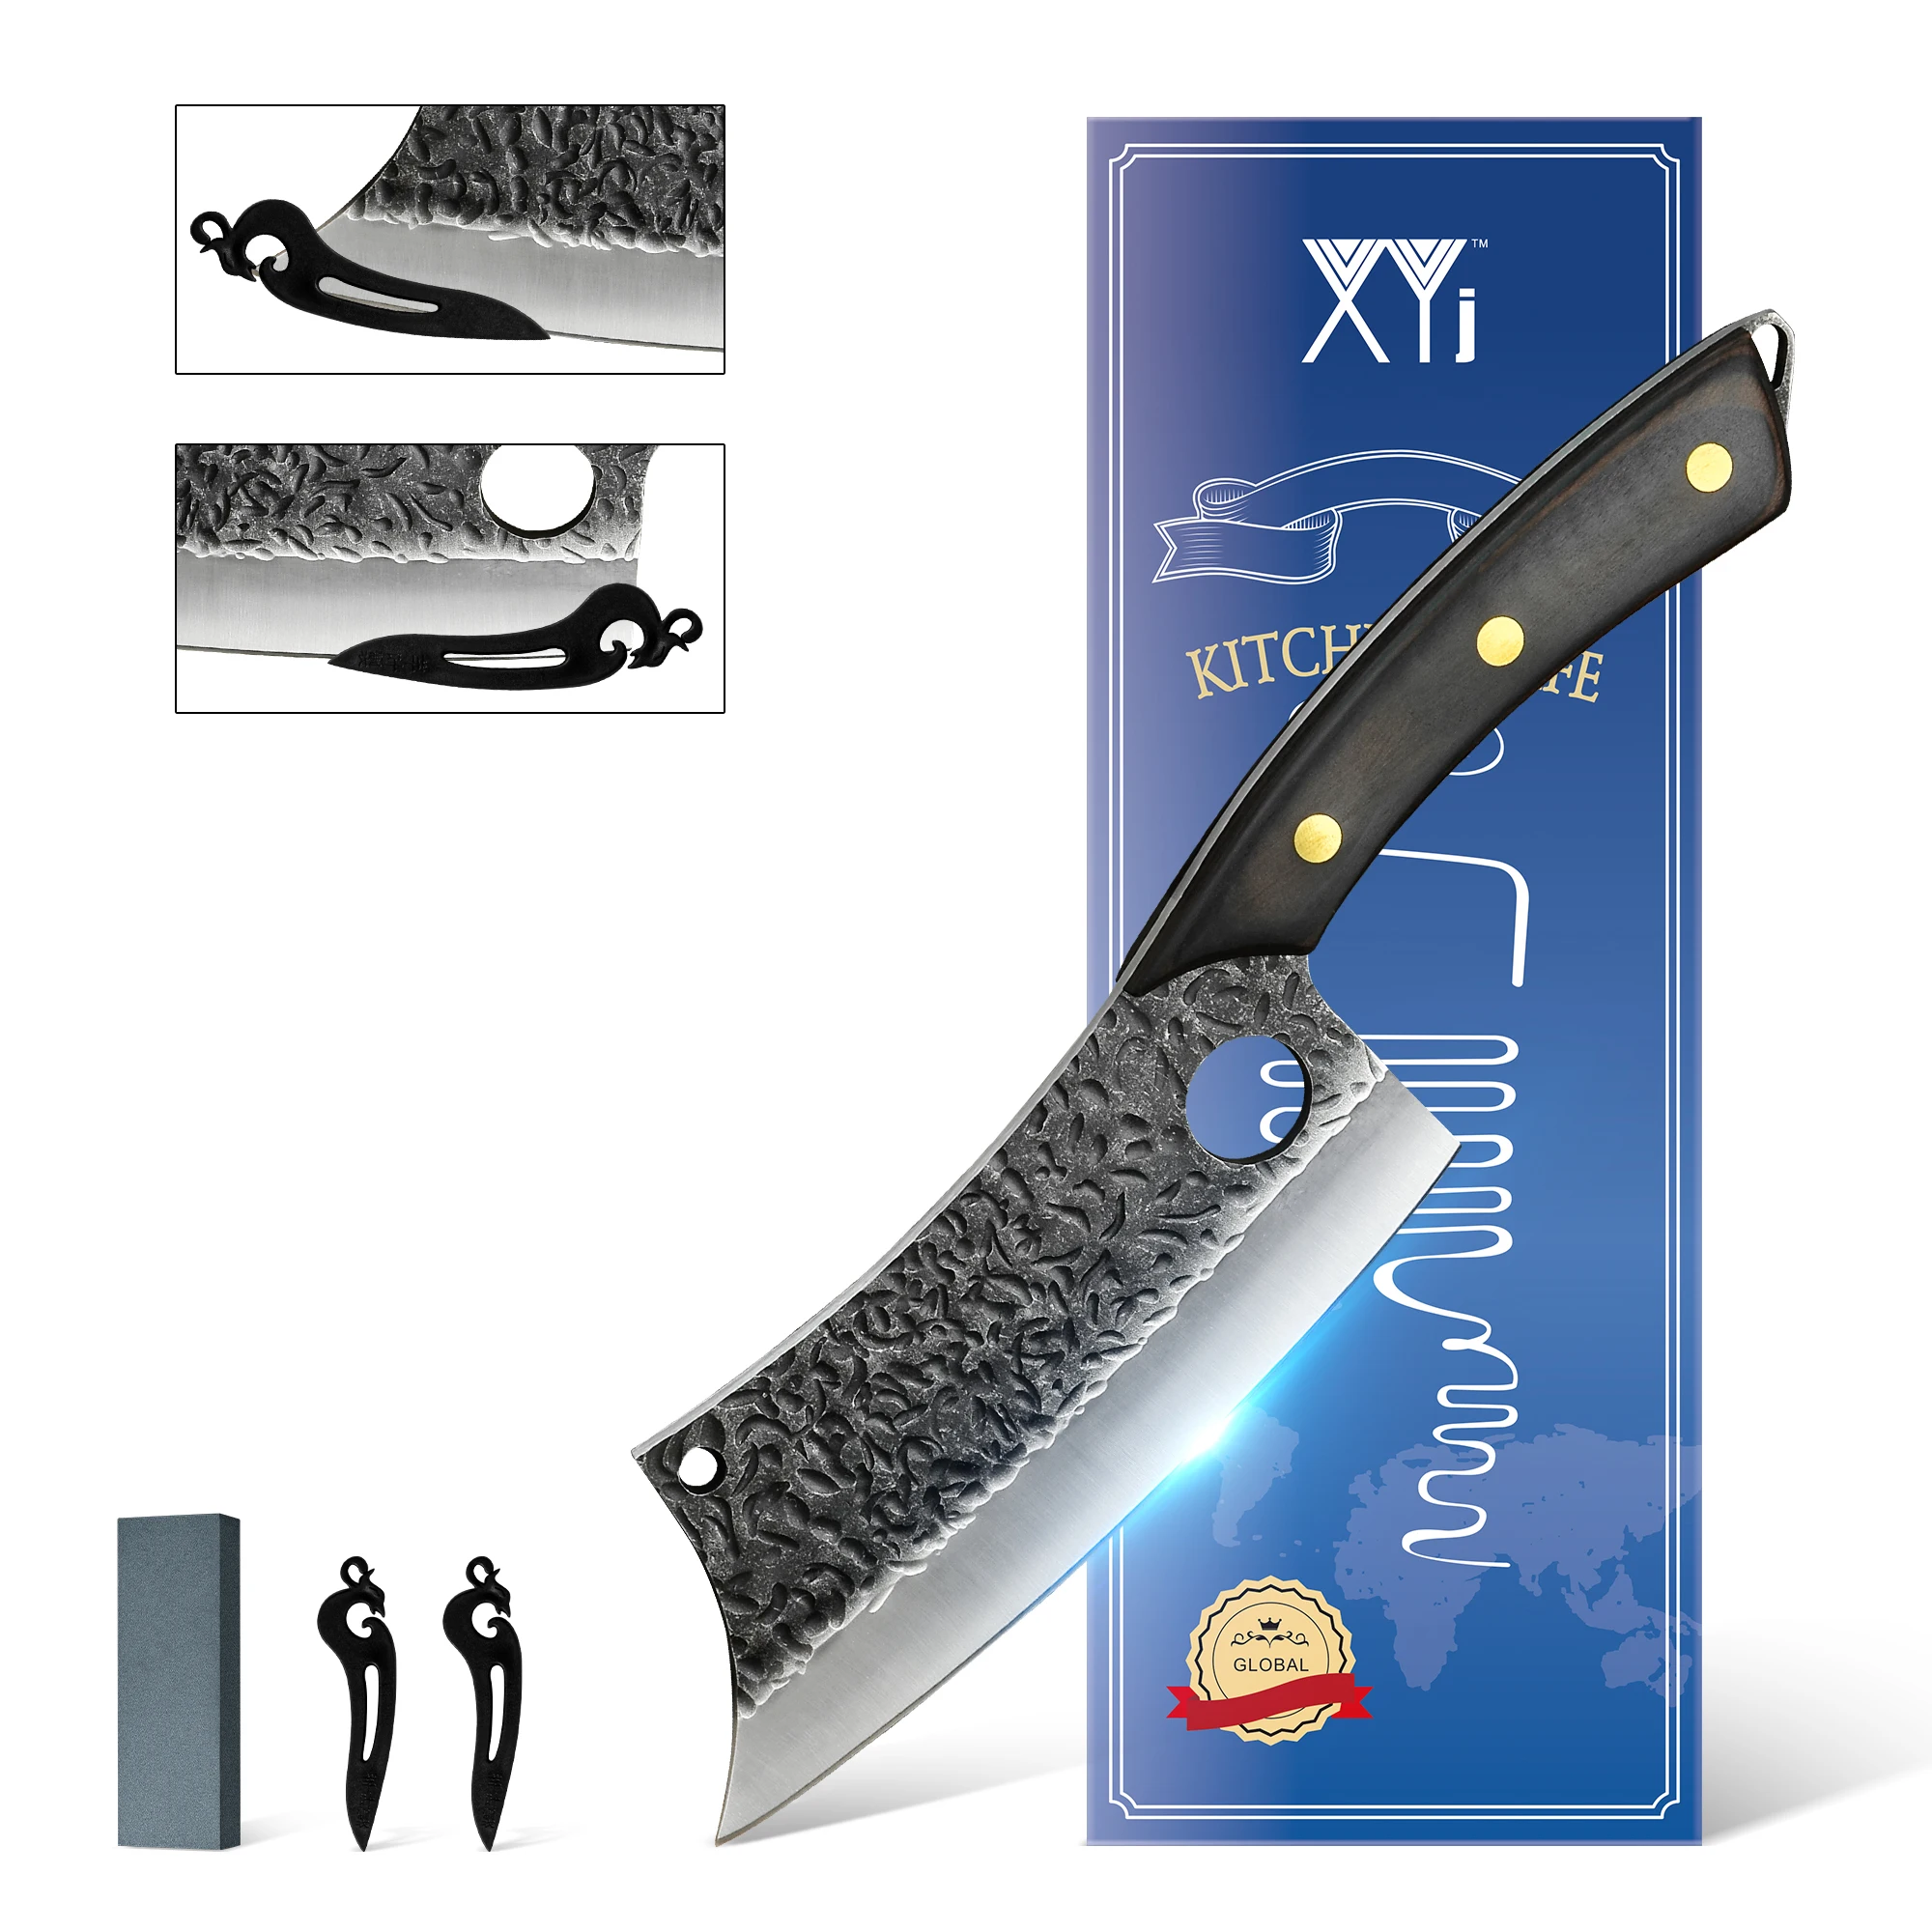 

XYj 7 Inch Slicing Knife Stainless Steel Chopping Knives Set Hammer Blade Cleaver Outdoor Camping Survival Tools With Whetstone